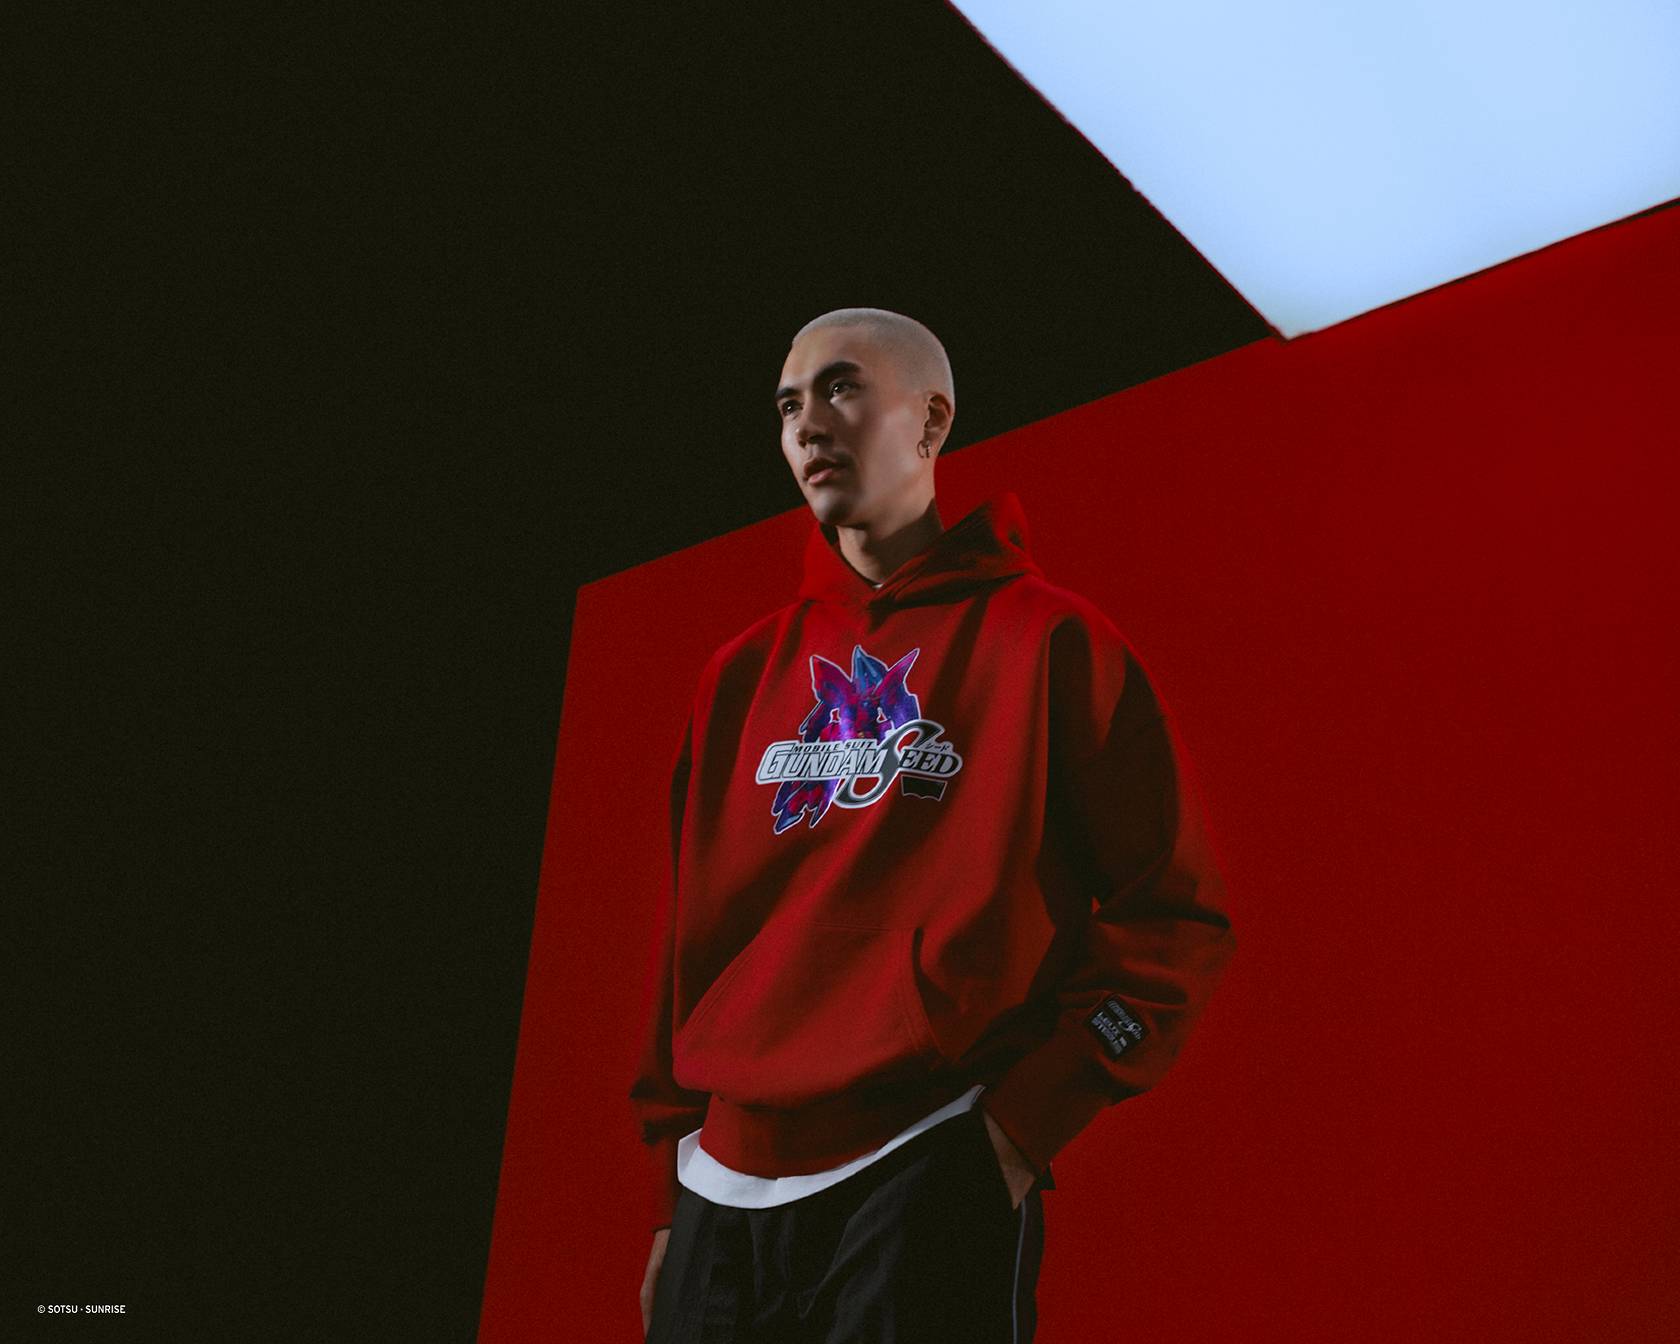 Image of male model wearing hooded red sweatshirt and posing against a futuristic background